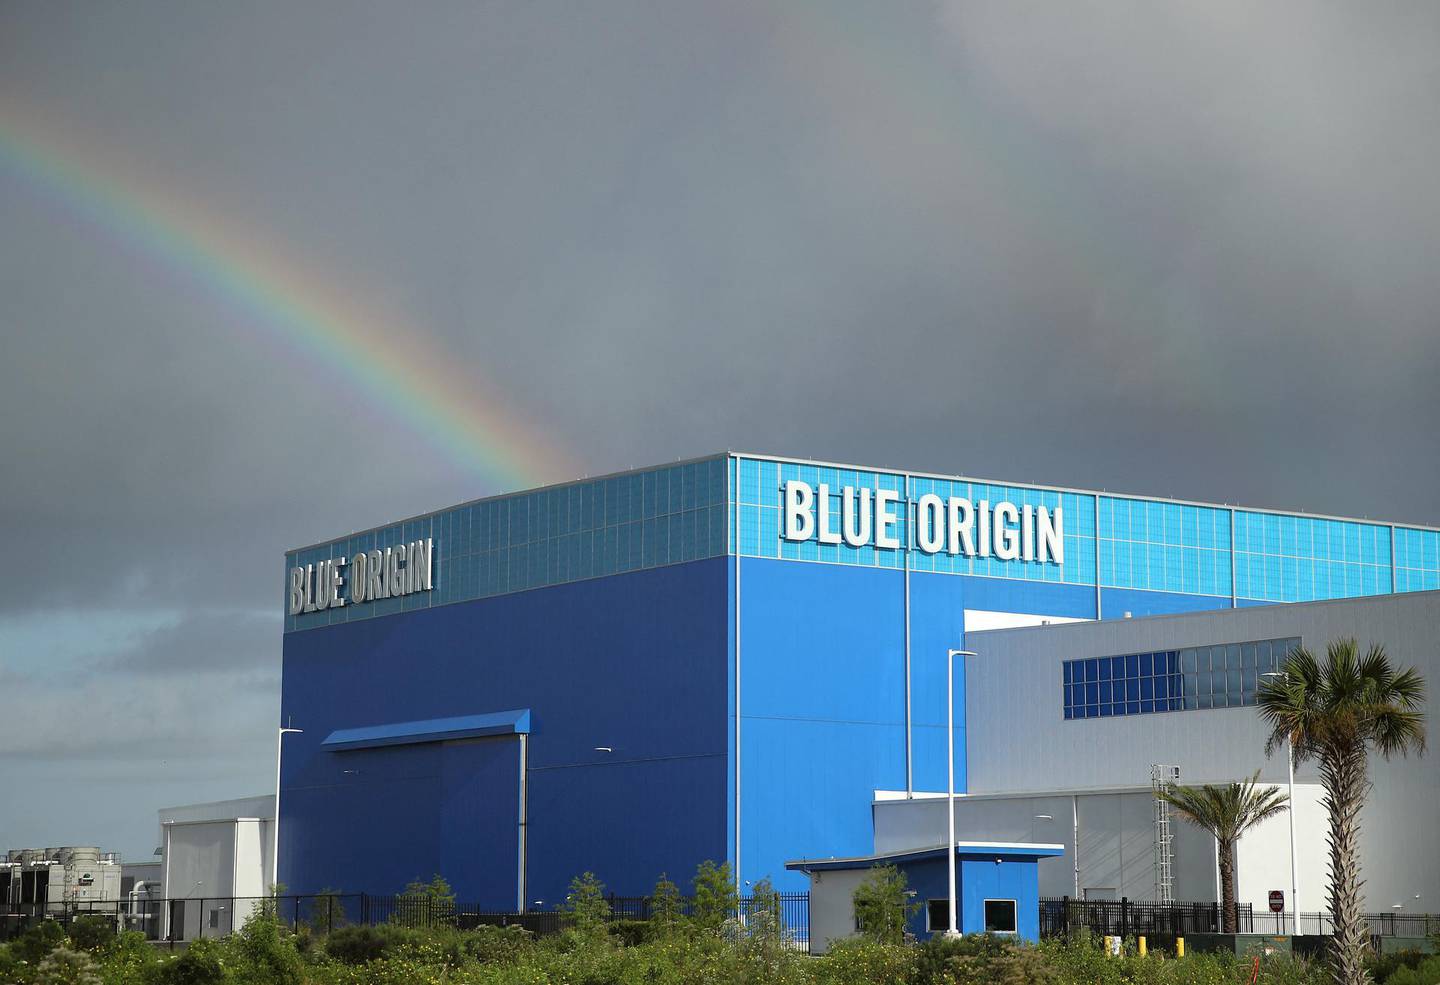 CAPE CANAVERAL, FLORIDA - AUGUST 31: Storm clouds and a rainbow appear over Jeff Bezos Blue Origin Aerospace Manufacturer building as Hurricane Dorian approaches Florida, on August 31, 2019 in Cape Canaveral, Florida. Dorian could be a Category 4 storm as it approaches the state and possibly making landfall as early as Monday somewhere along the east coast.   Mark Wilson/Getty Images/AFP (Photo by MARK WILSON / GETTY IMAGES NORTH AMERICA / Getty Images via AFP)